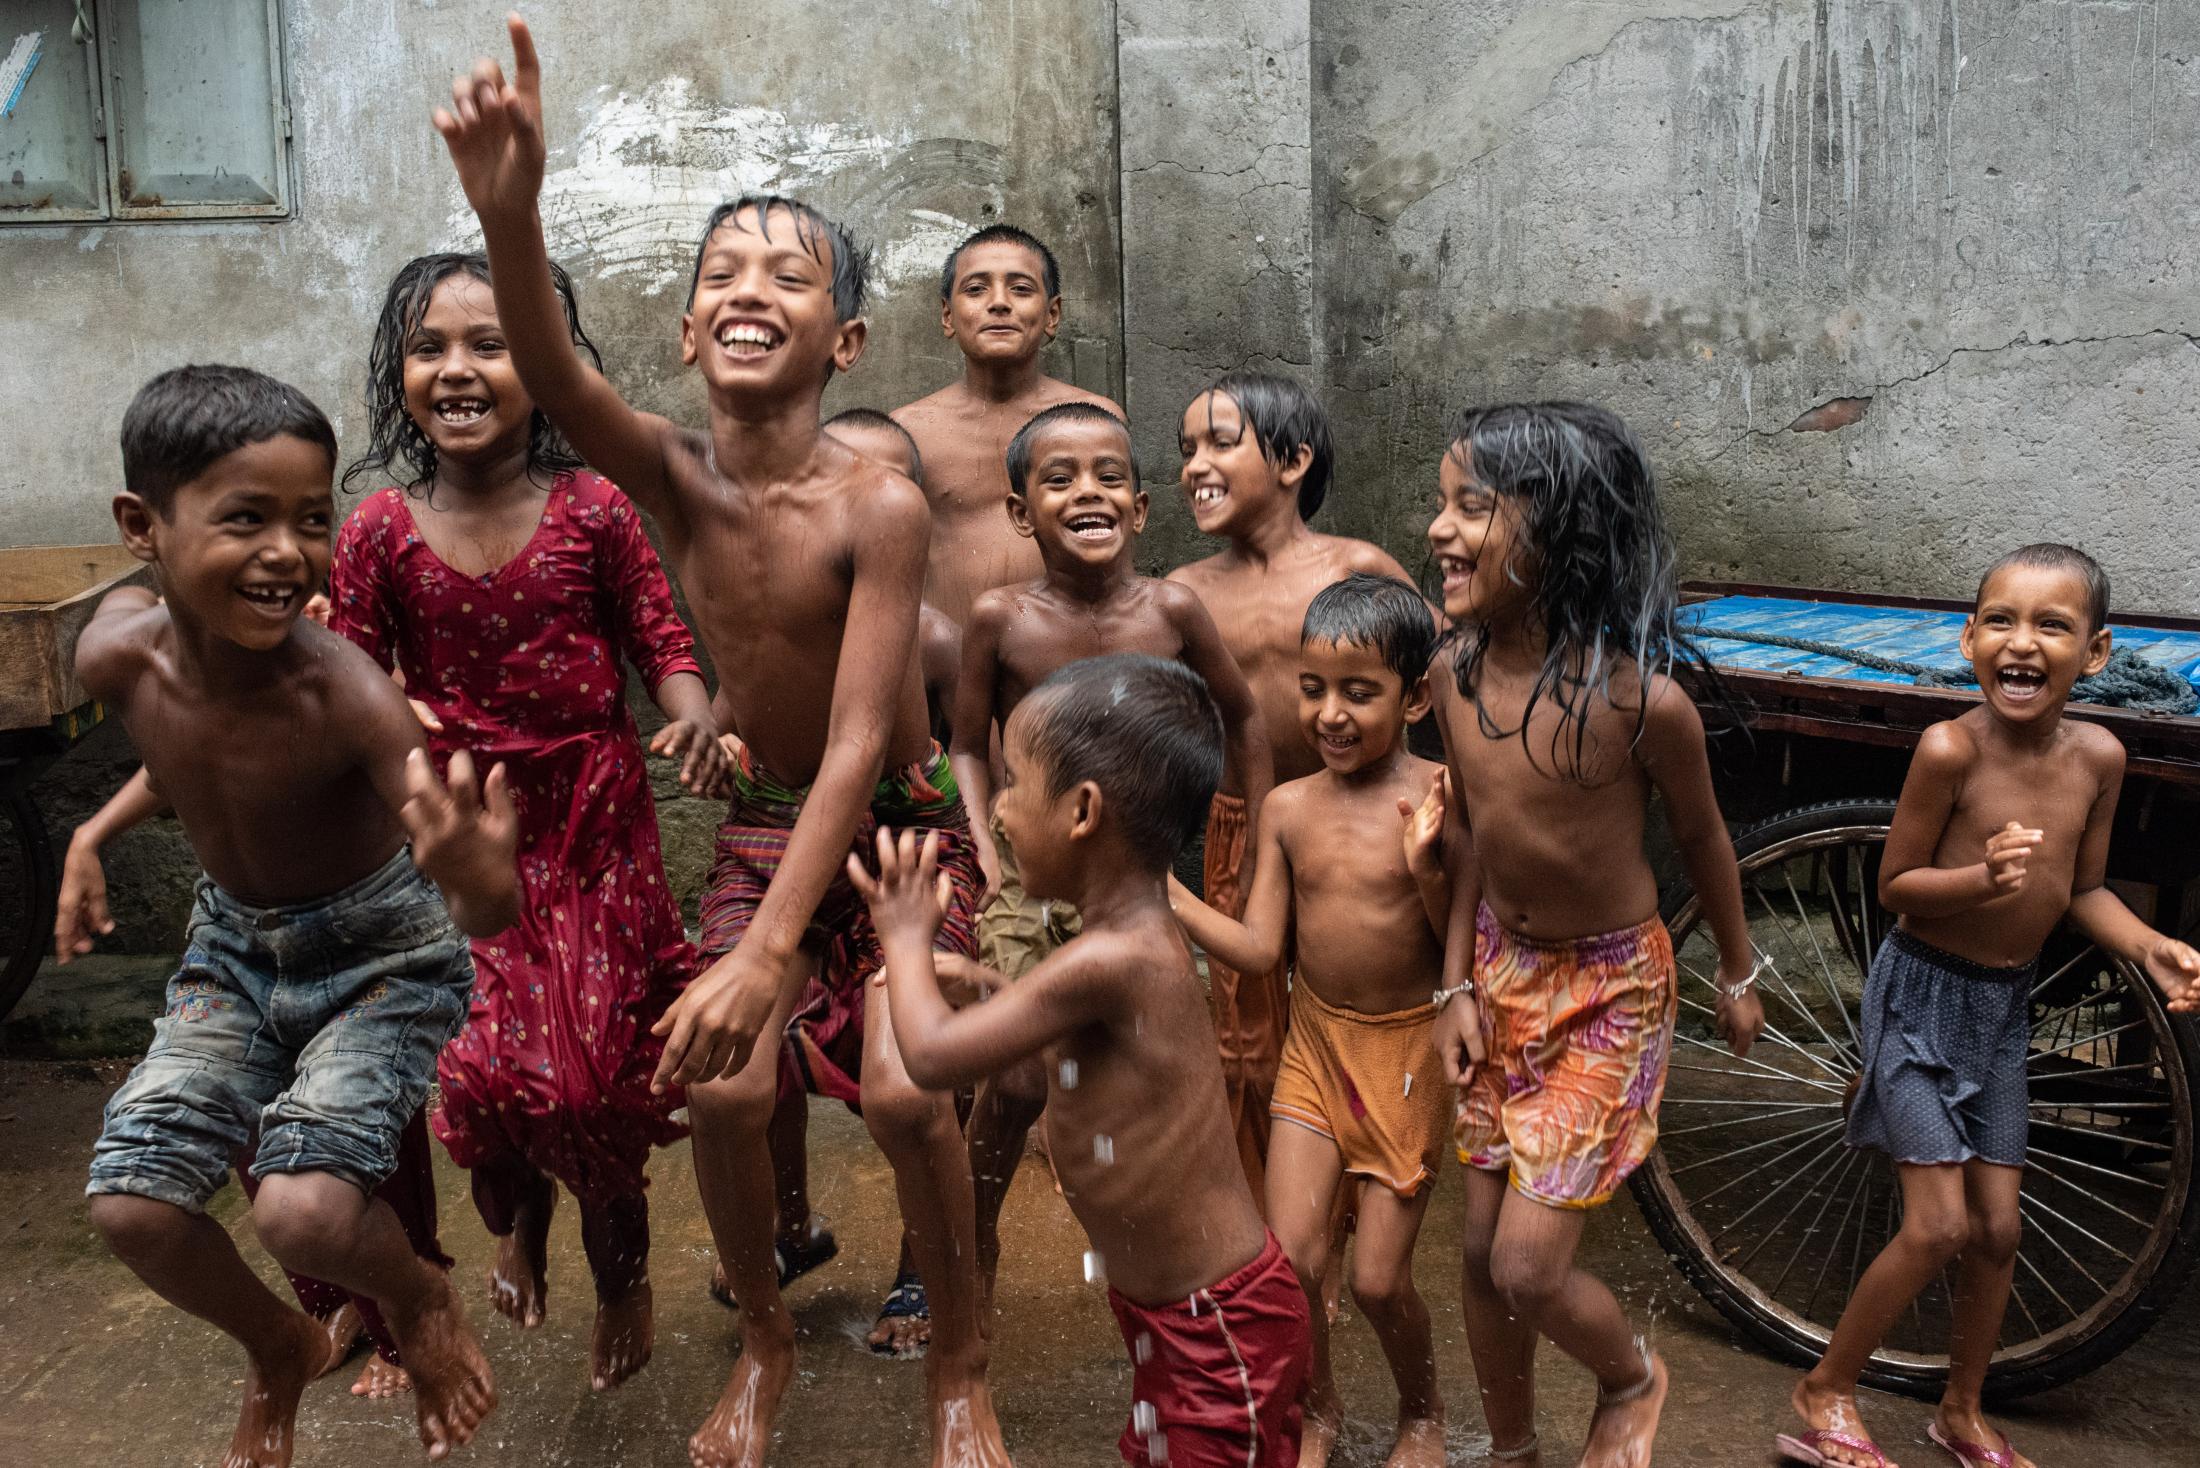 The rain and happiness - Kids are seen play on the street of Dhaka, Bangladesh during the rain on July 28, 2021.